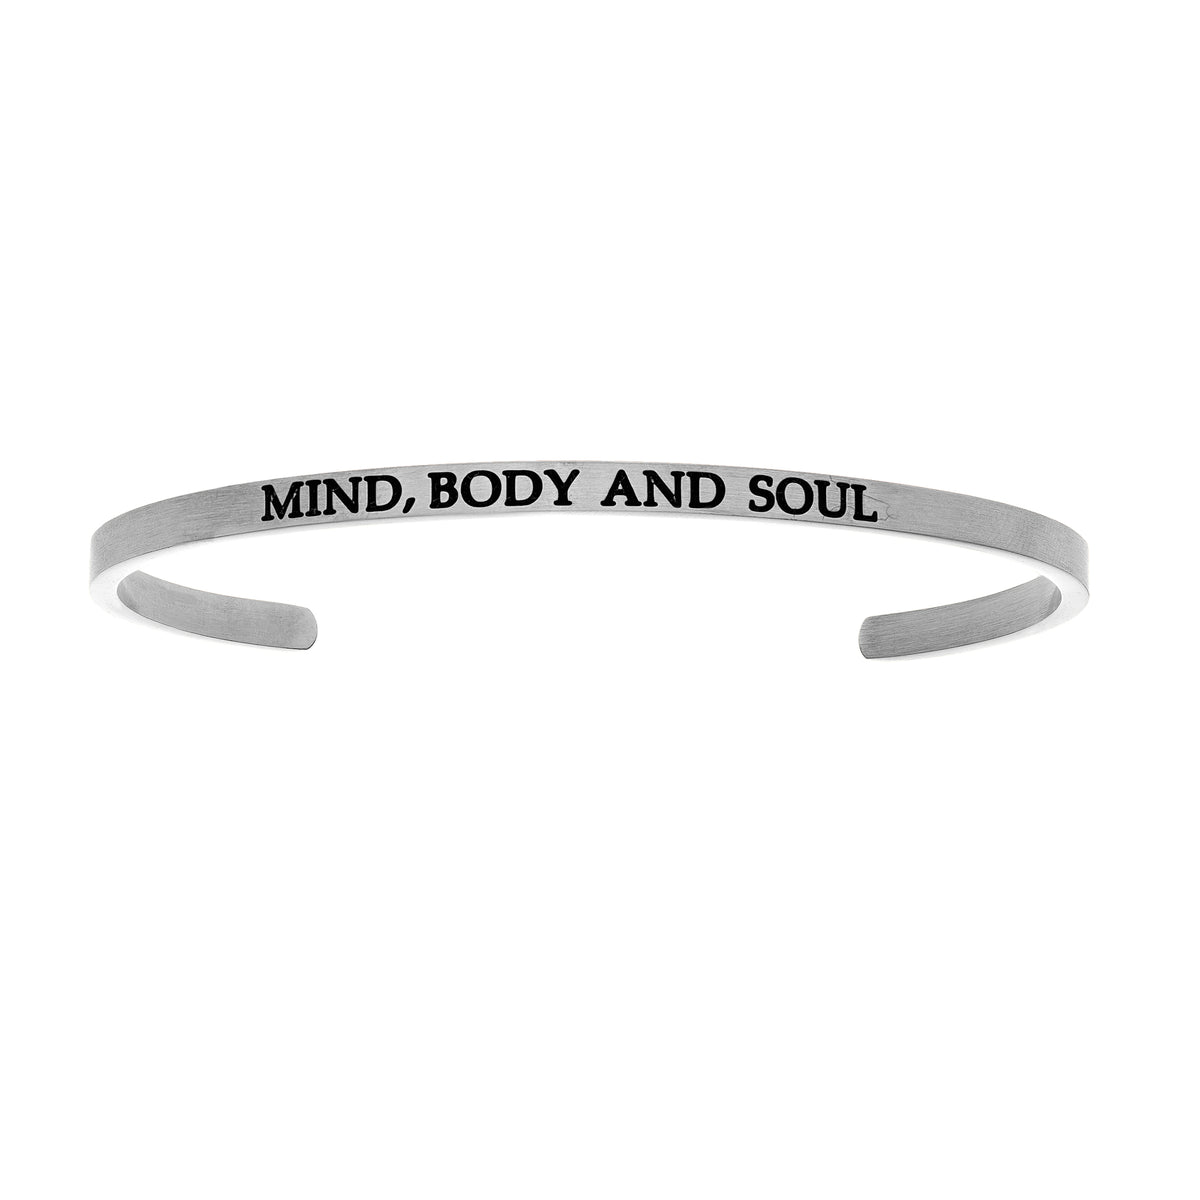 Intuitions Stainless Steel MIND, BODY AND SOUL Diamond Accent Cuff Bangle Bracelet fine designer jewelry for men and women